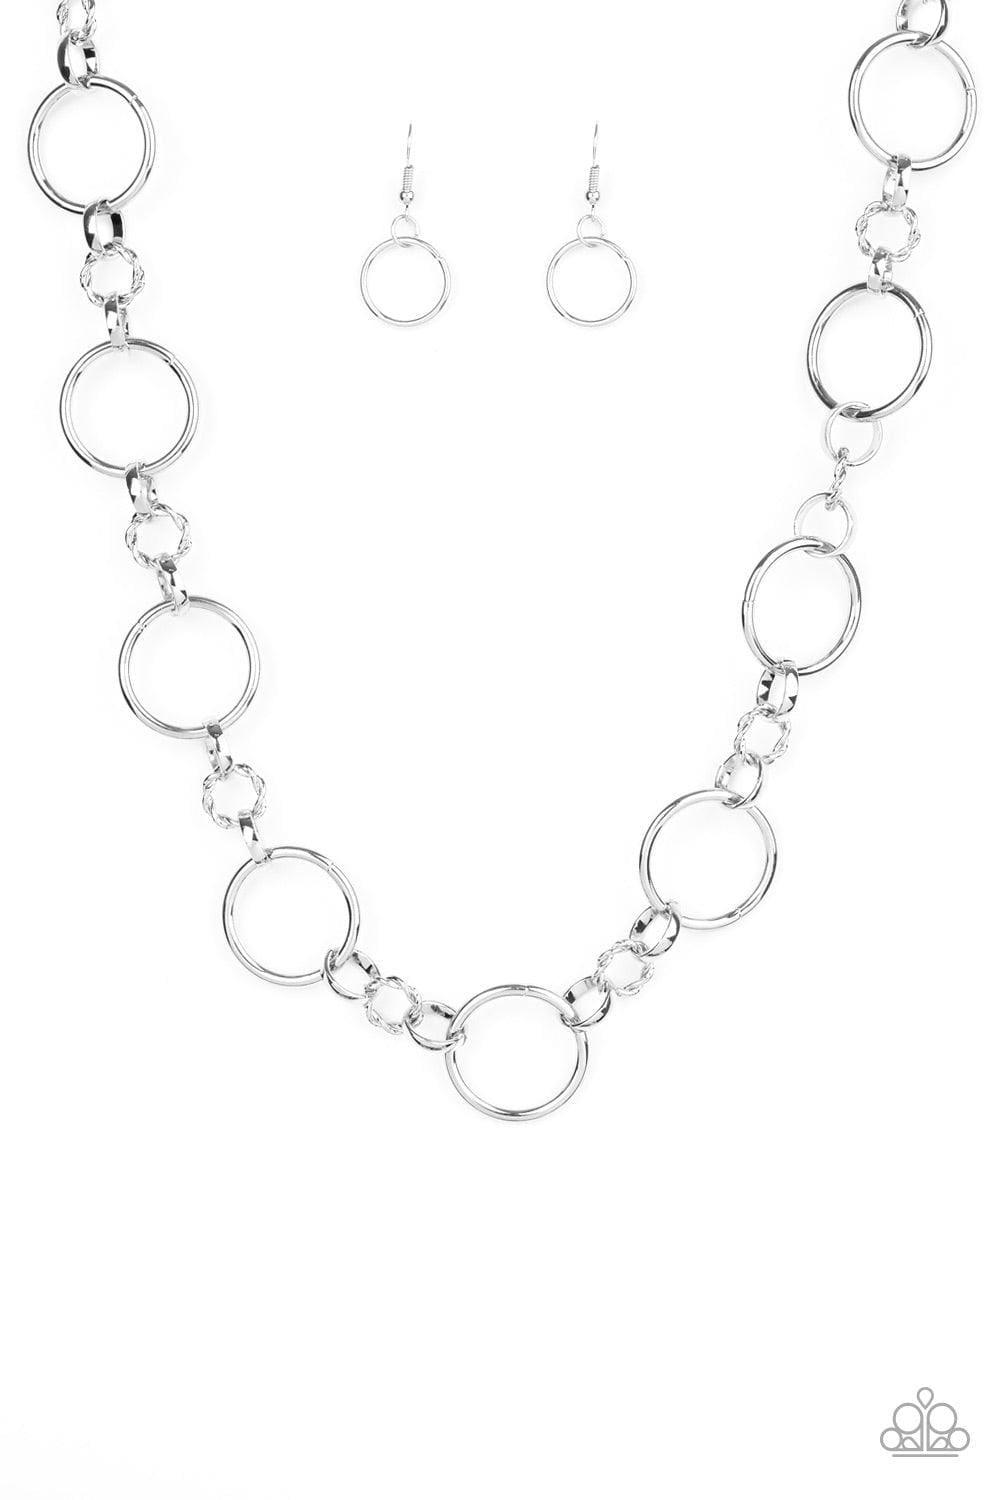 Paparazzi Accessories - Classic Combo - Silver Necklace - Bling by JessieK